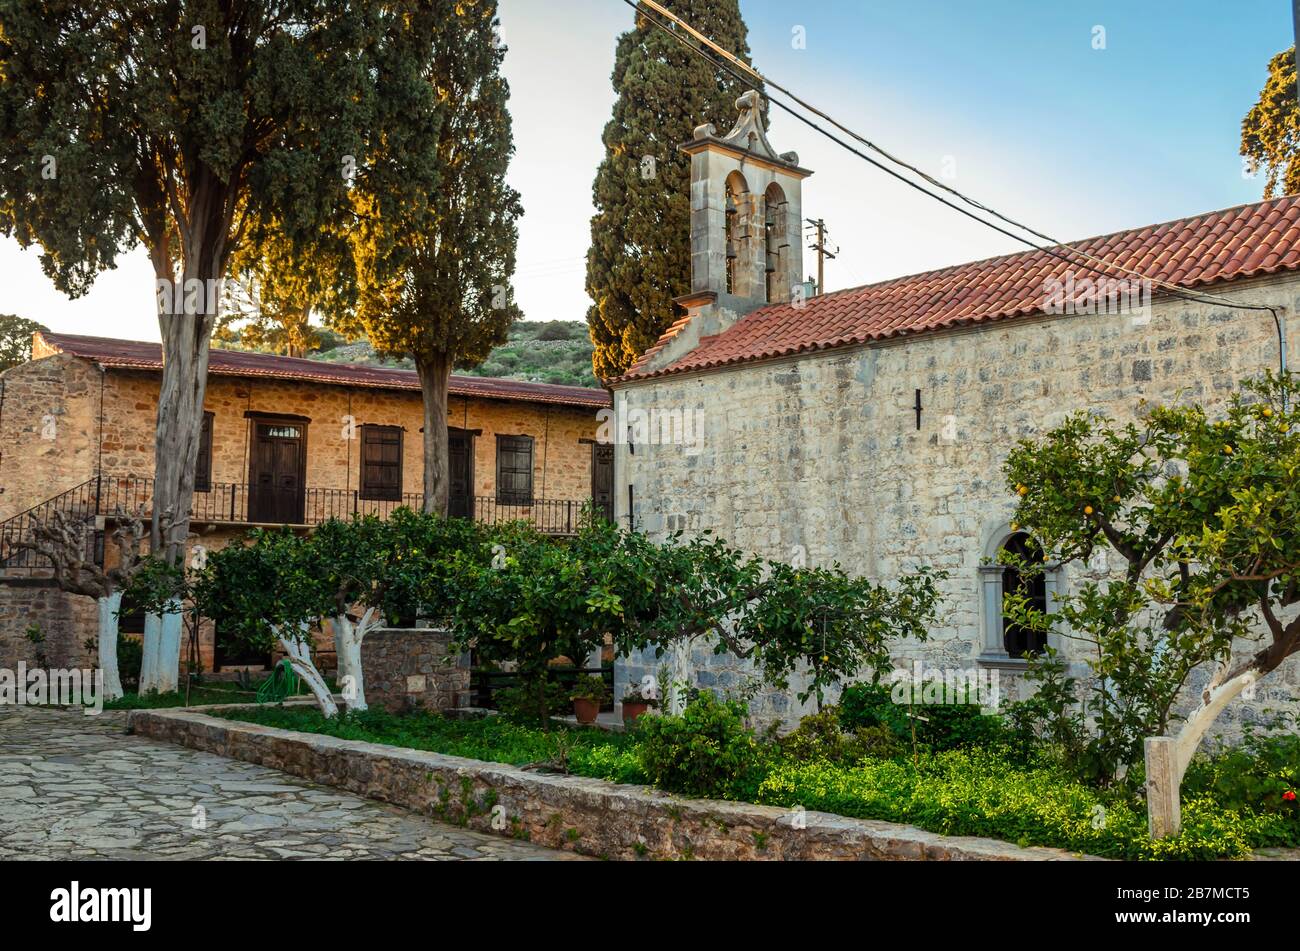 Areti monastery is one of the beautiful Cretan monasteries.It is located next to the village Karydi in a  isolated area of Mirabello province. Stock Photo